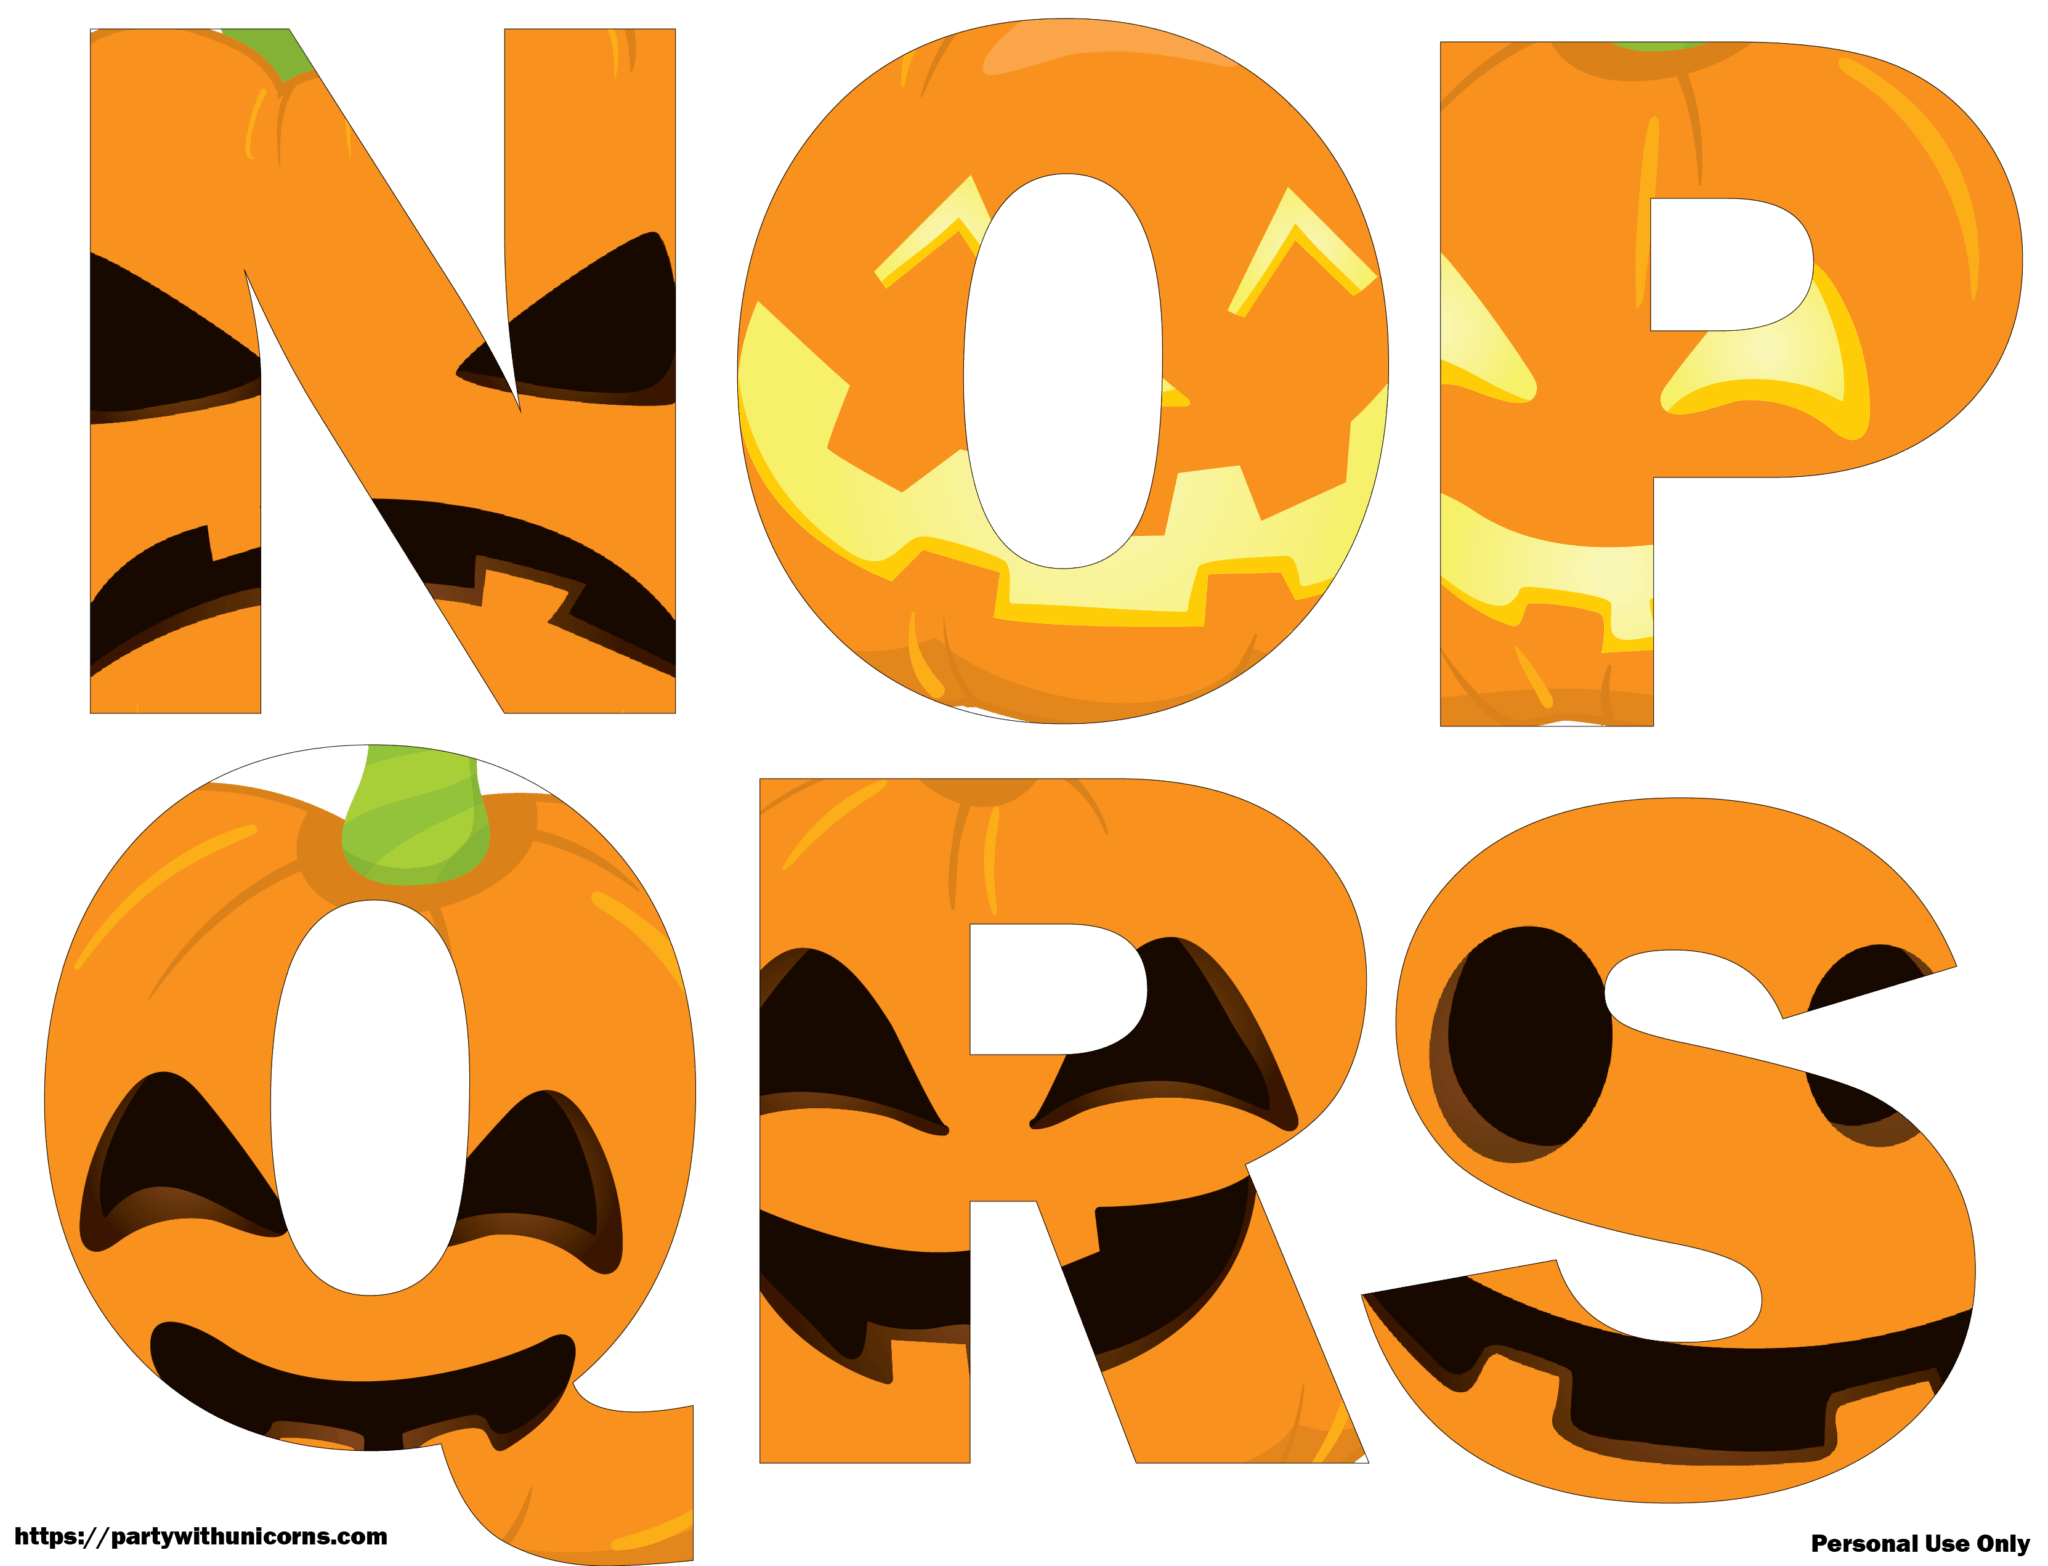 Download Free Halloween Letters Printable Jack O Lantern Faces PSD Mockup Template